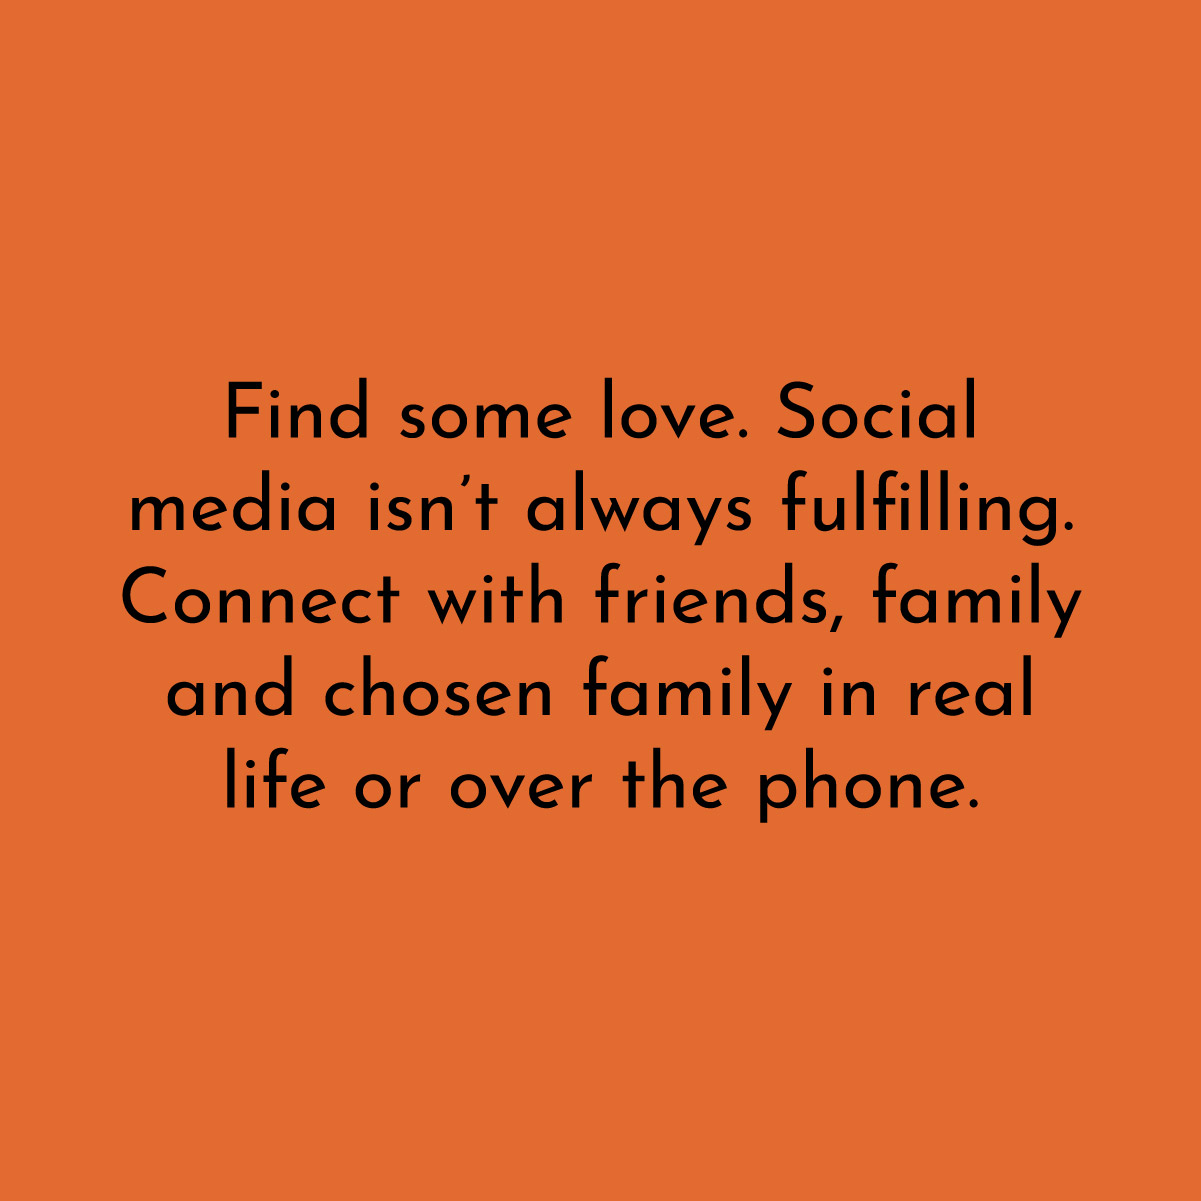 Find some love. Social media isn't always fulfilling. Connect with friends, family and chosen family in real life or over the phone.